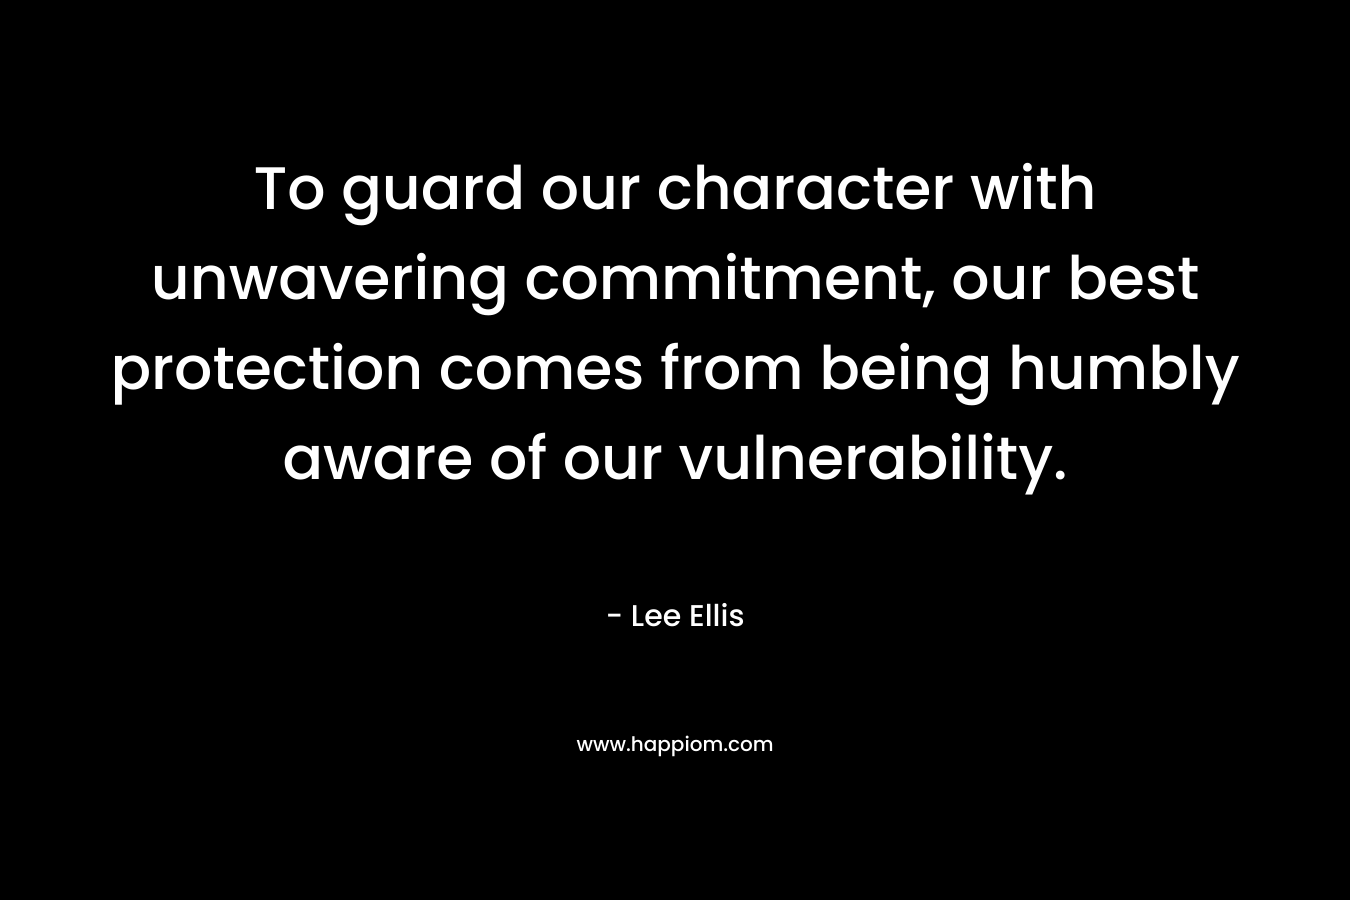 To guard our character with unwavering commitment, our best protection comes from being humbly aware of our vulnerability. – Lee Ellis